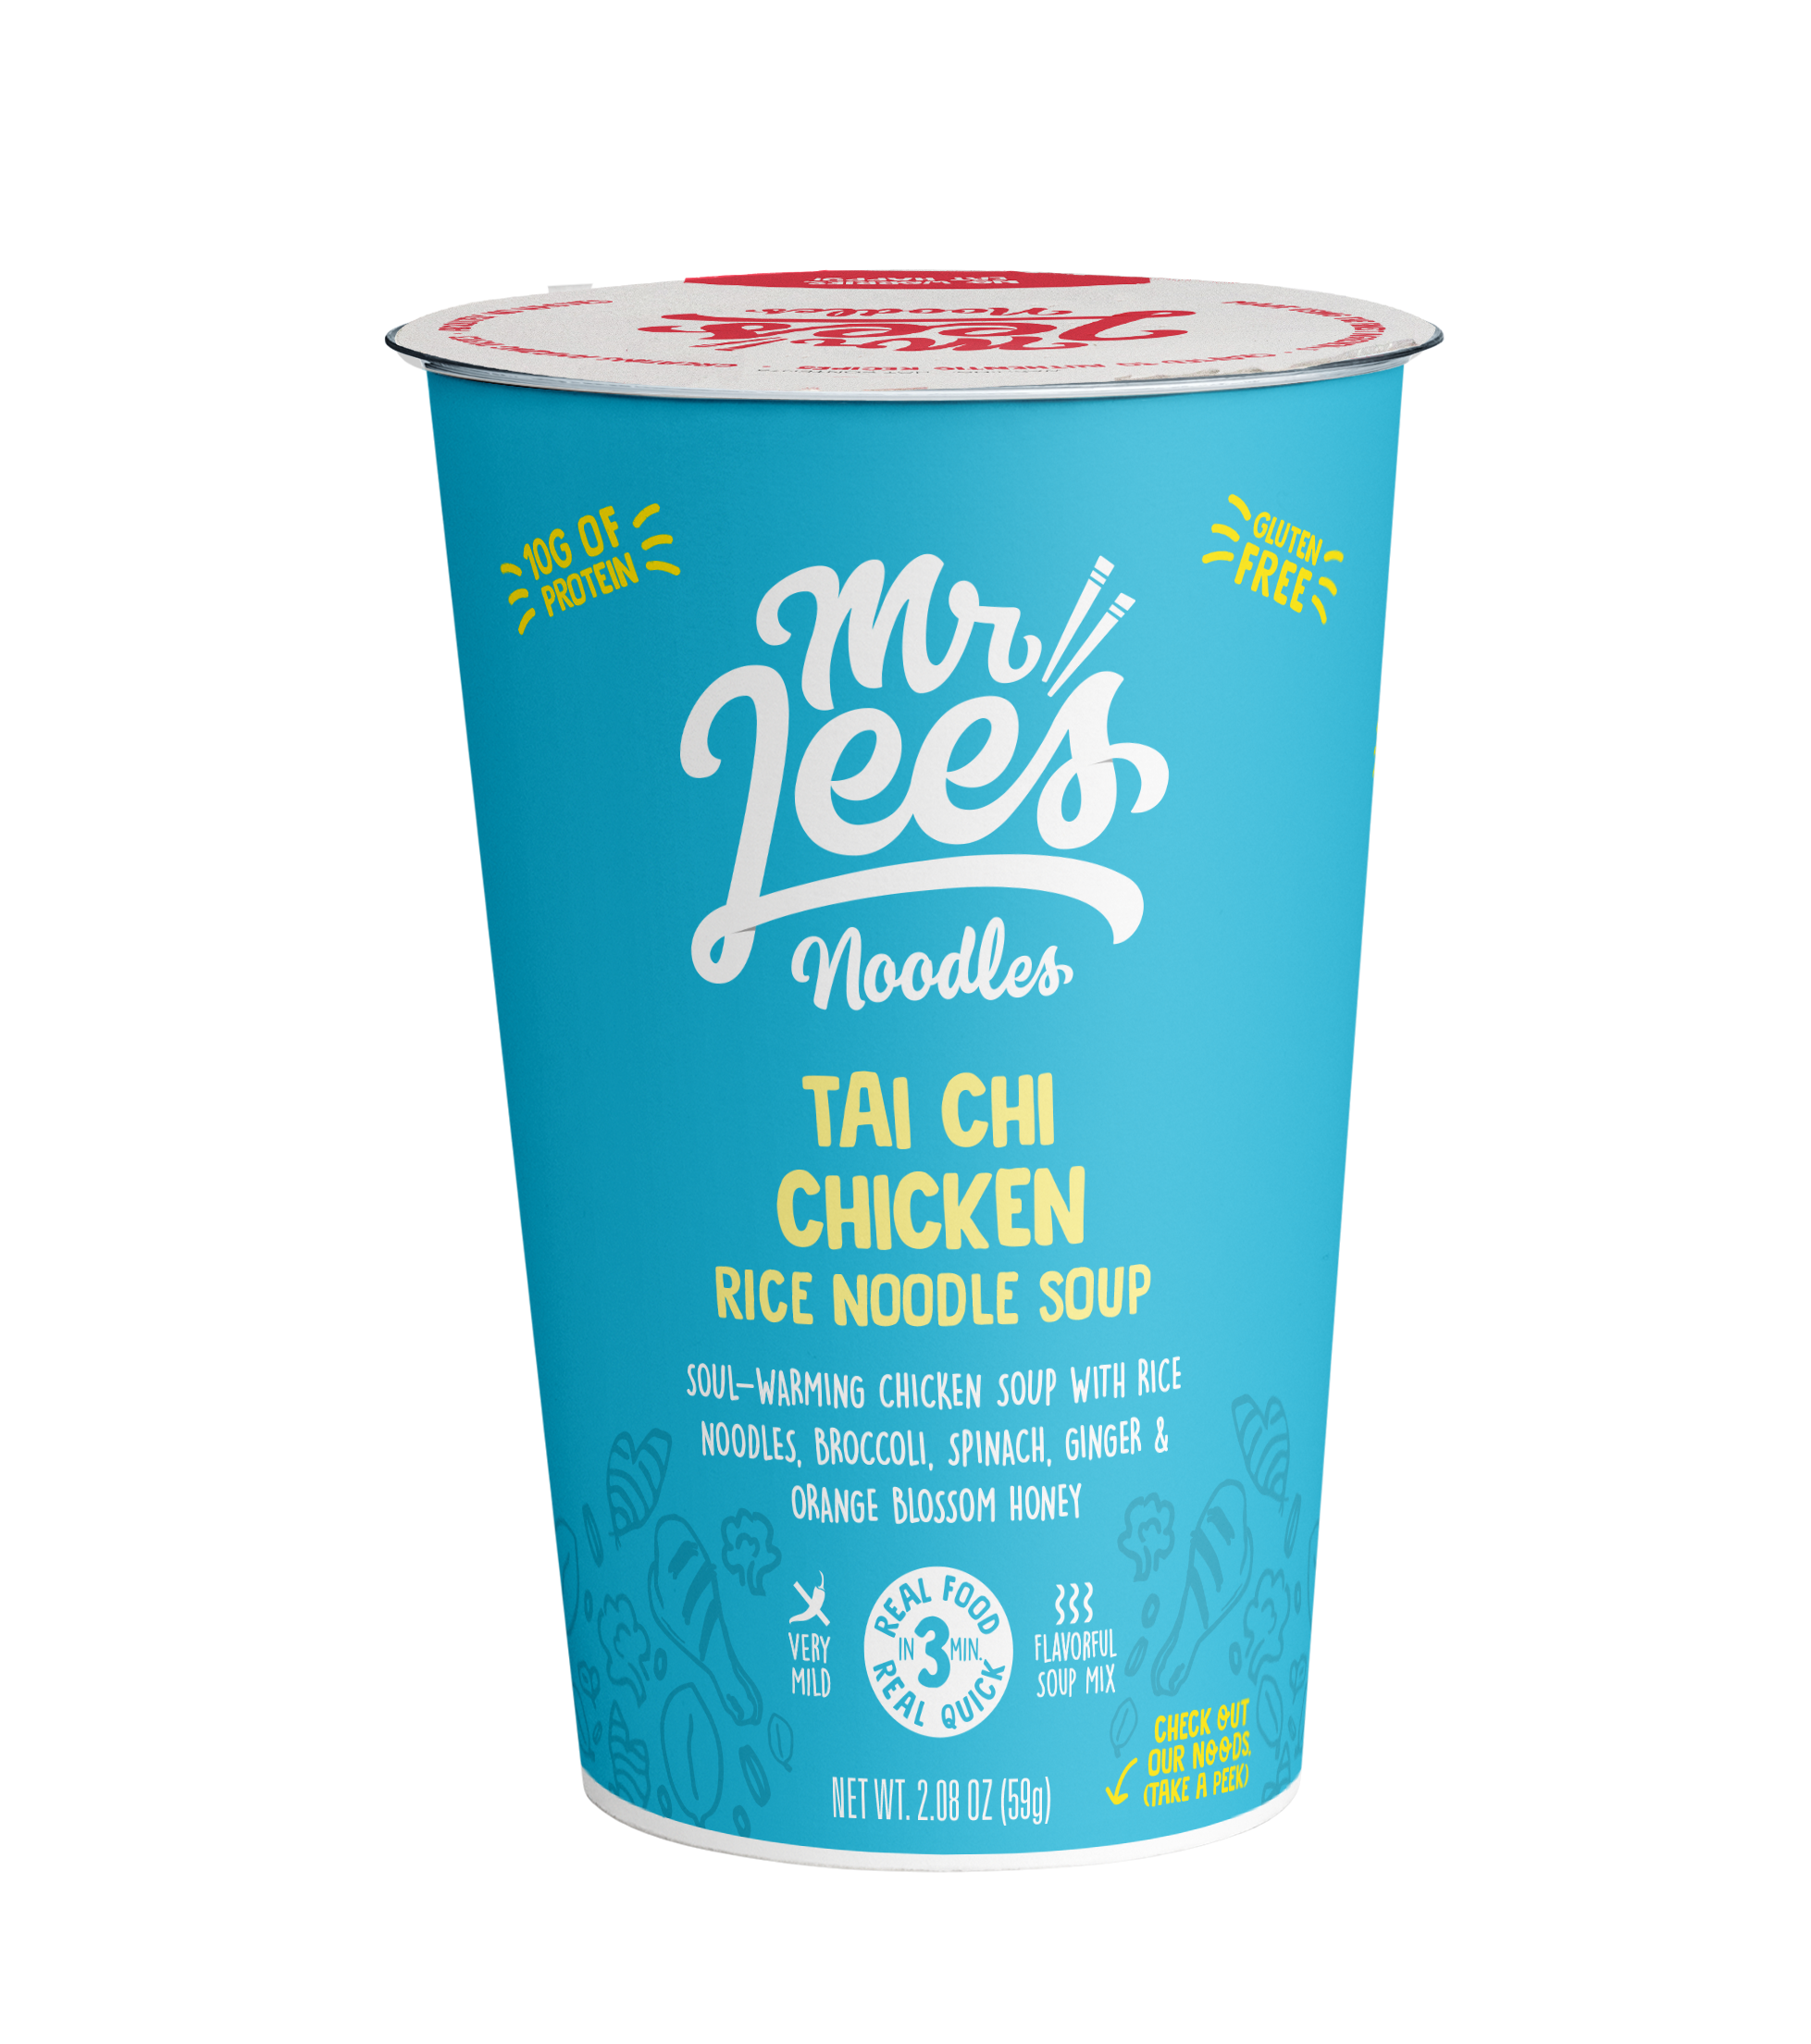 Mr. Lee's: Noodles that Consumers Will Pay for - Gourmet NewsGourmet News